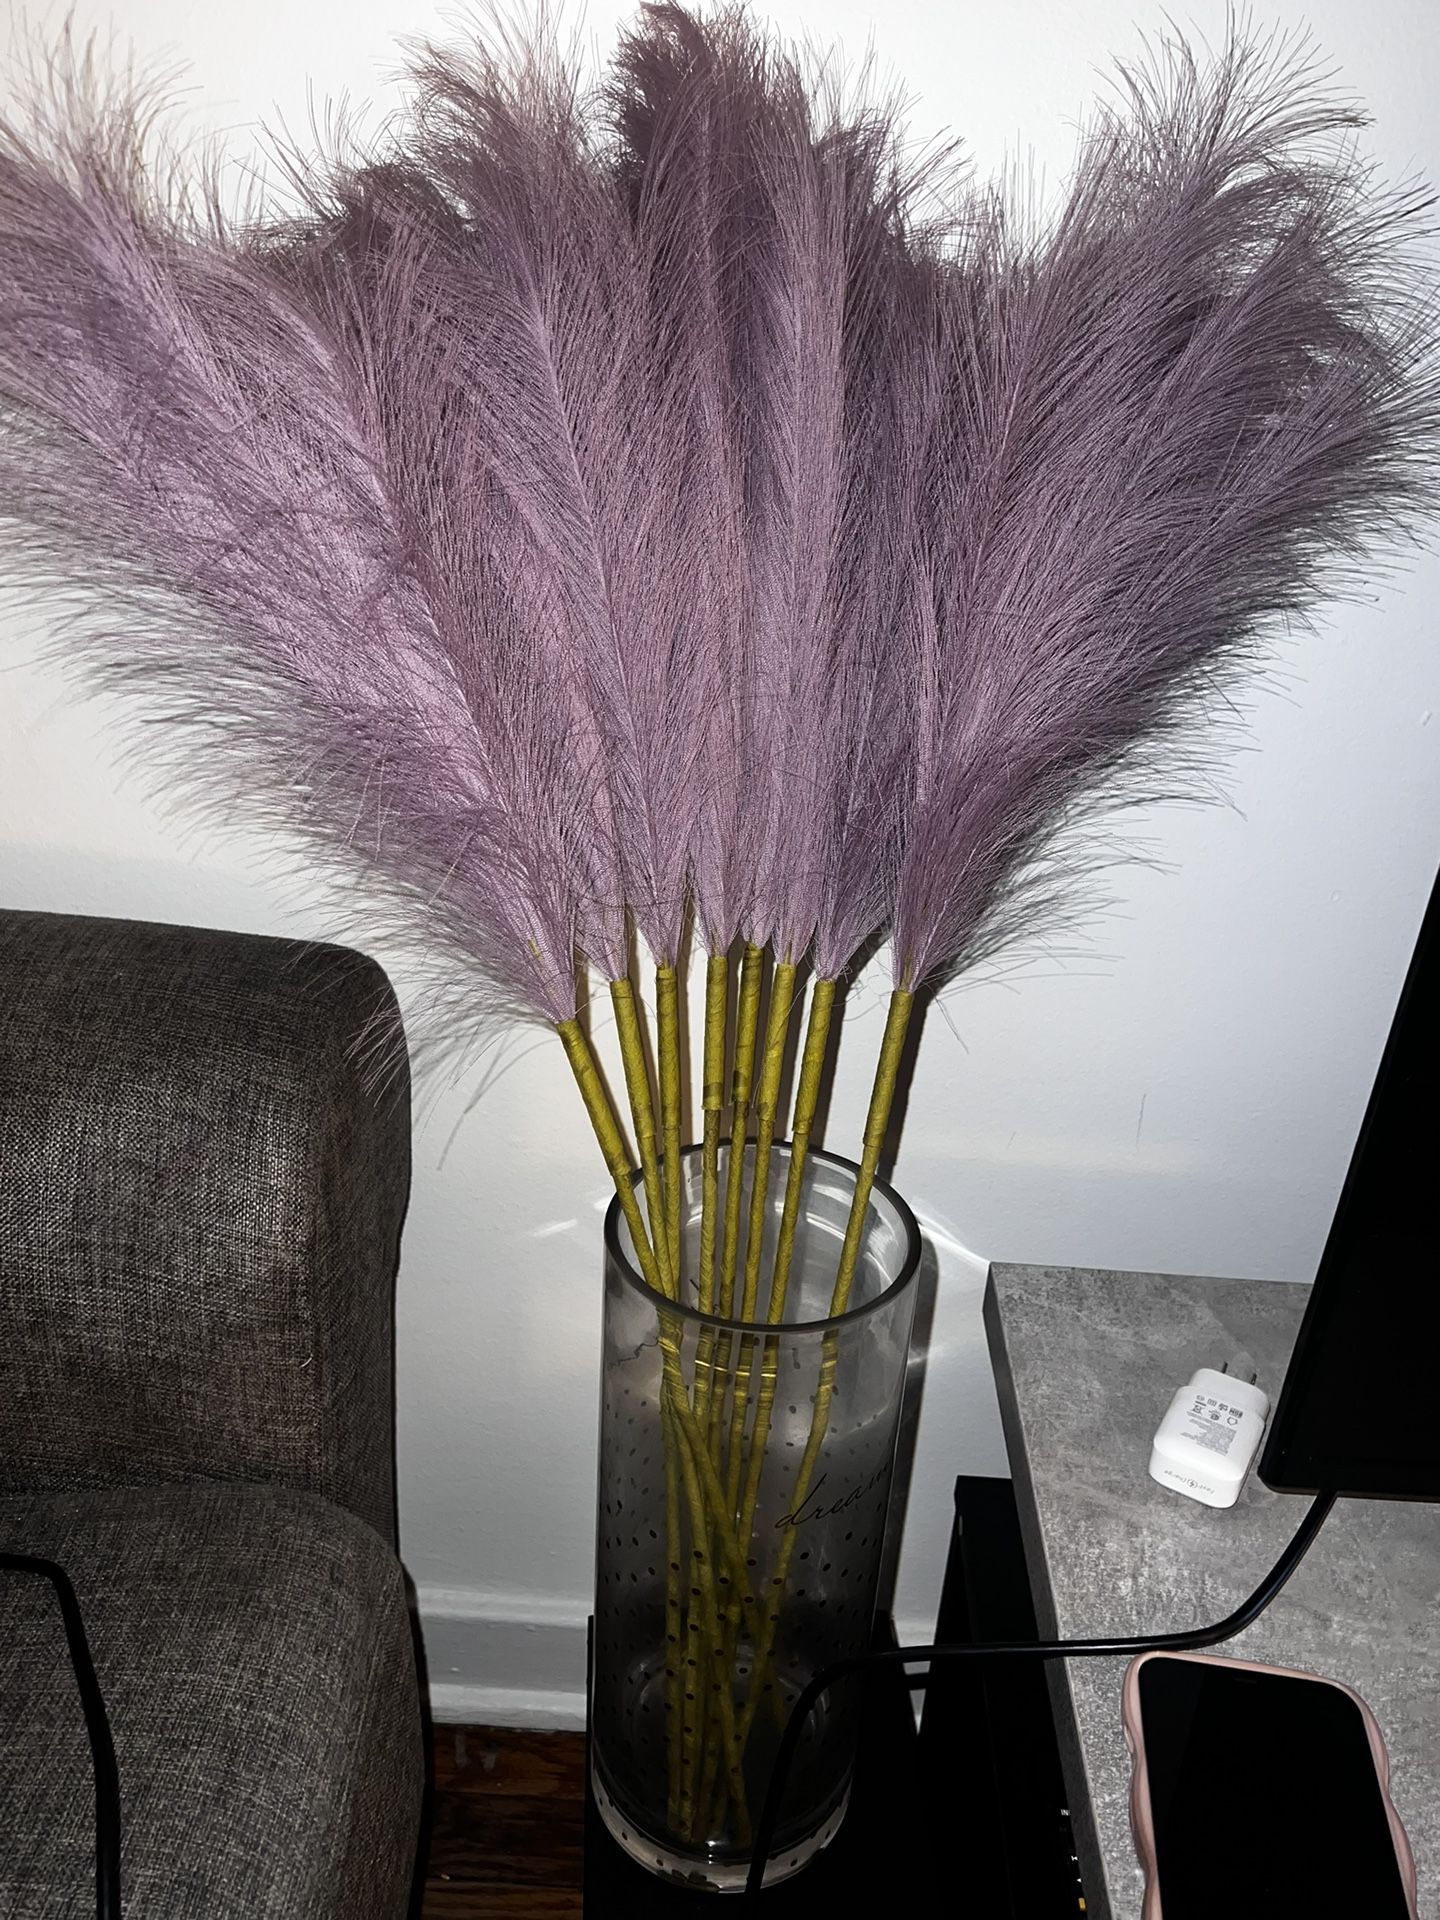 8 Feathers For Decorating Without The Vase 